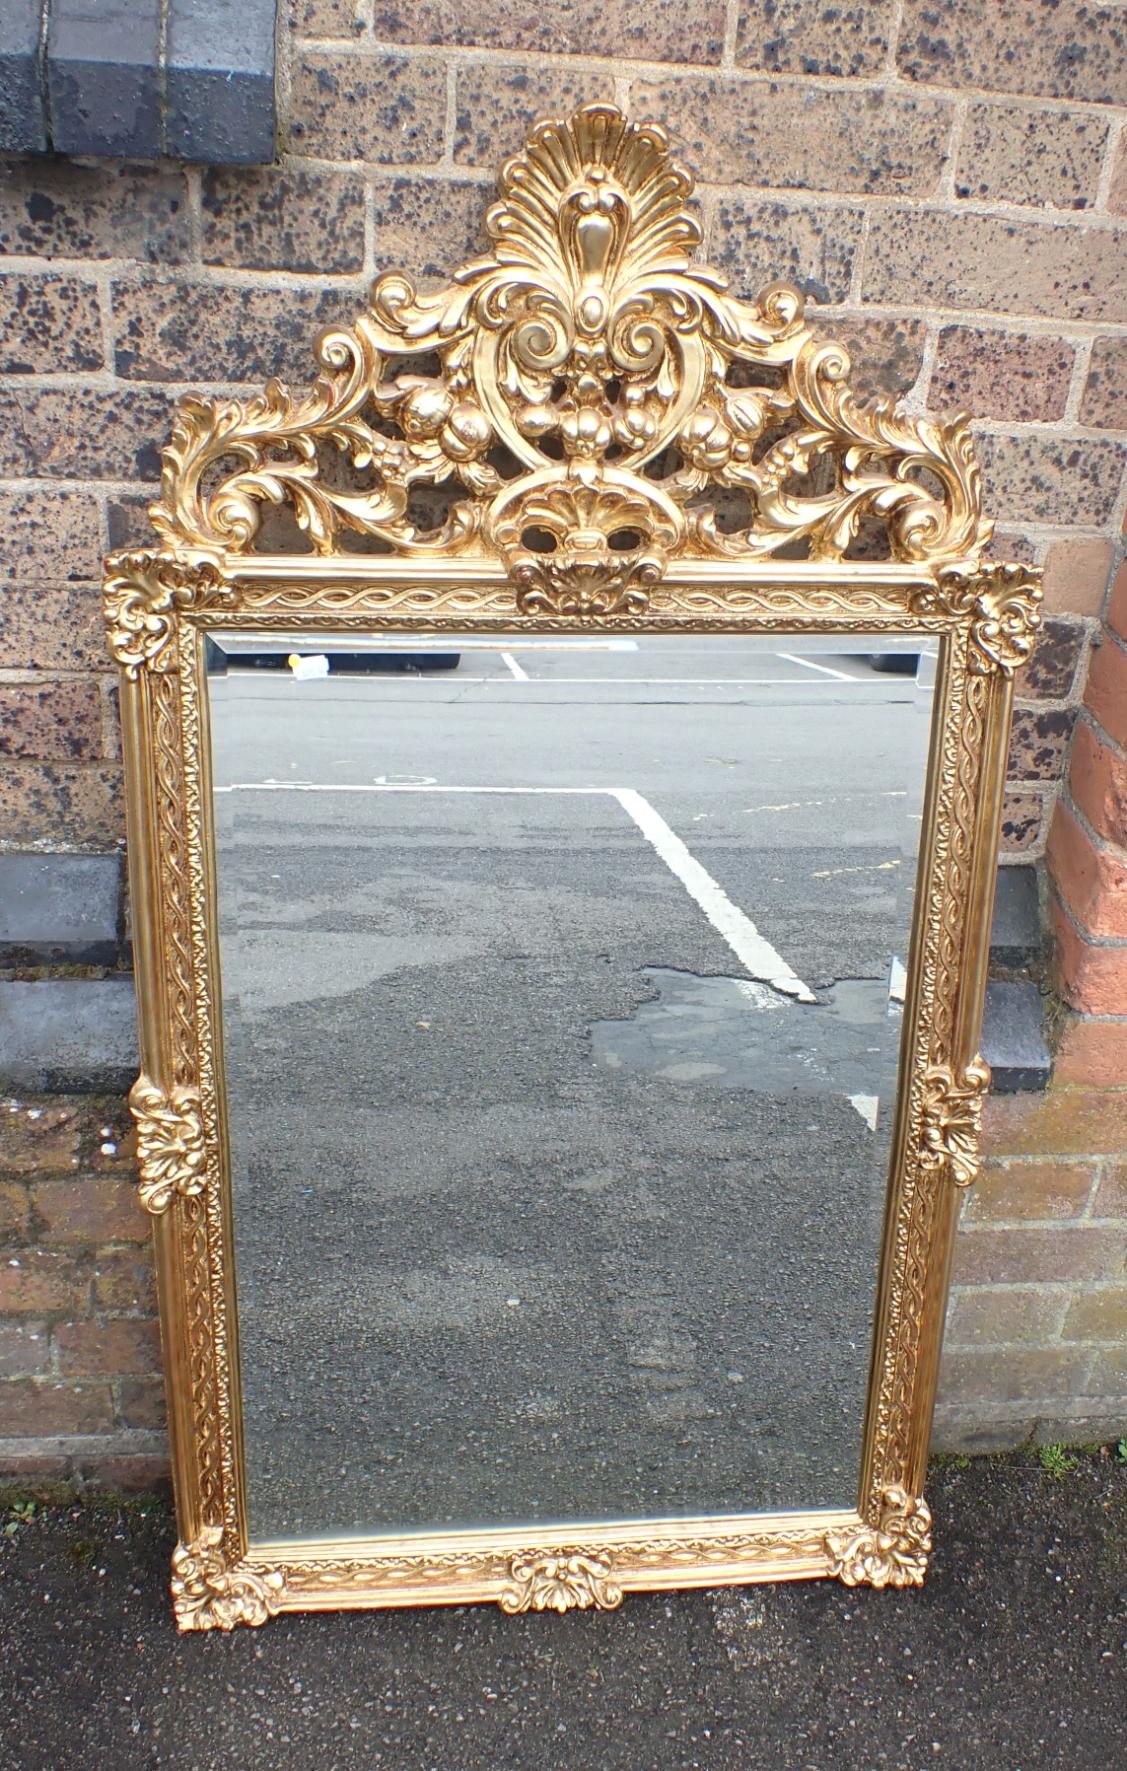 A GILT FRAME MIRROR WITH ROCOCO STYLE CREST